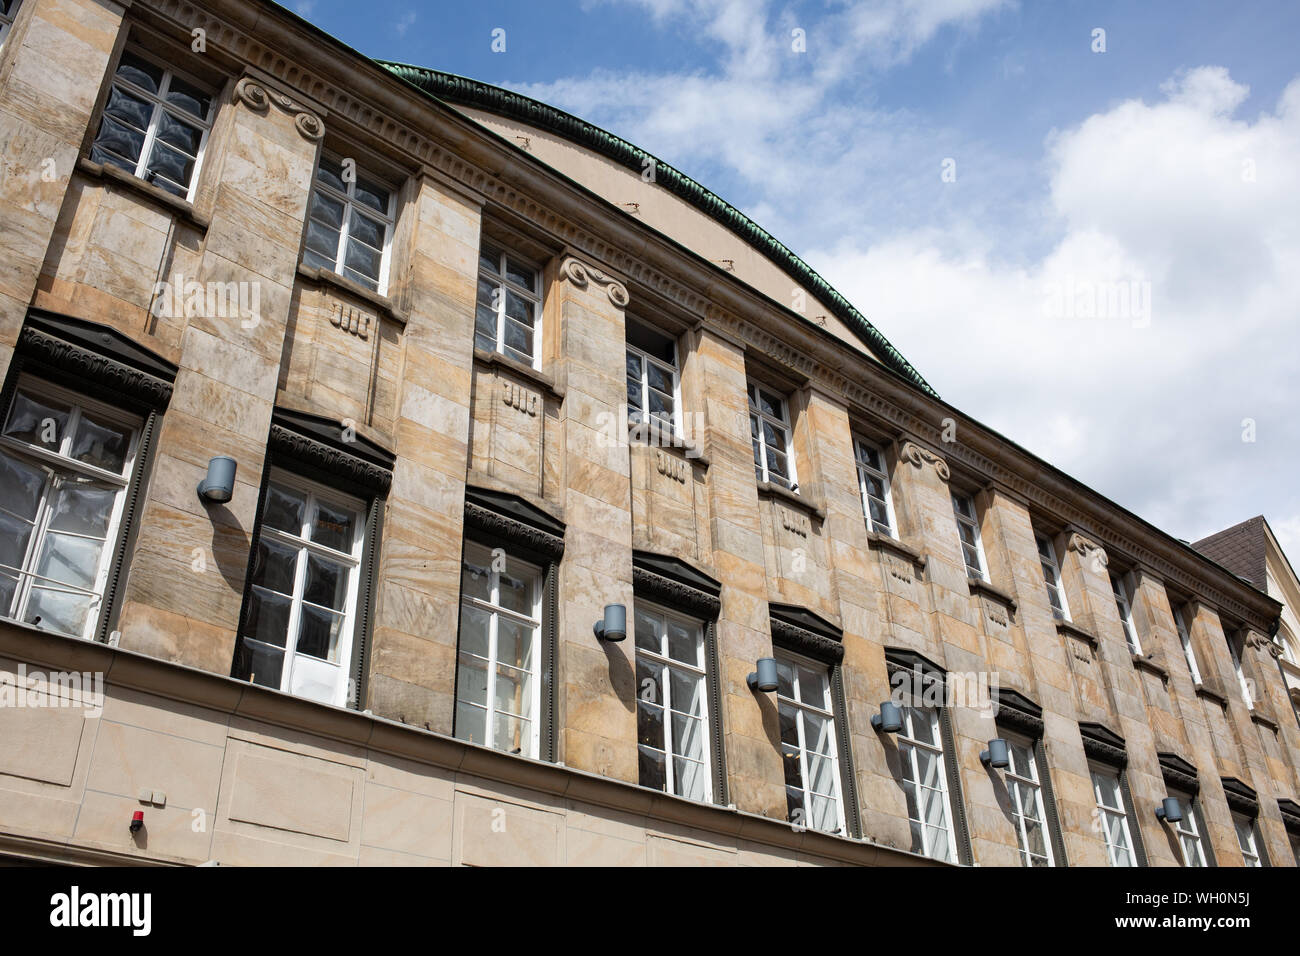 Heidelberg, Baden Württemberg / Germany / Detail of Old Building with lot of windows Stock Photo